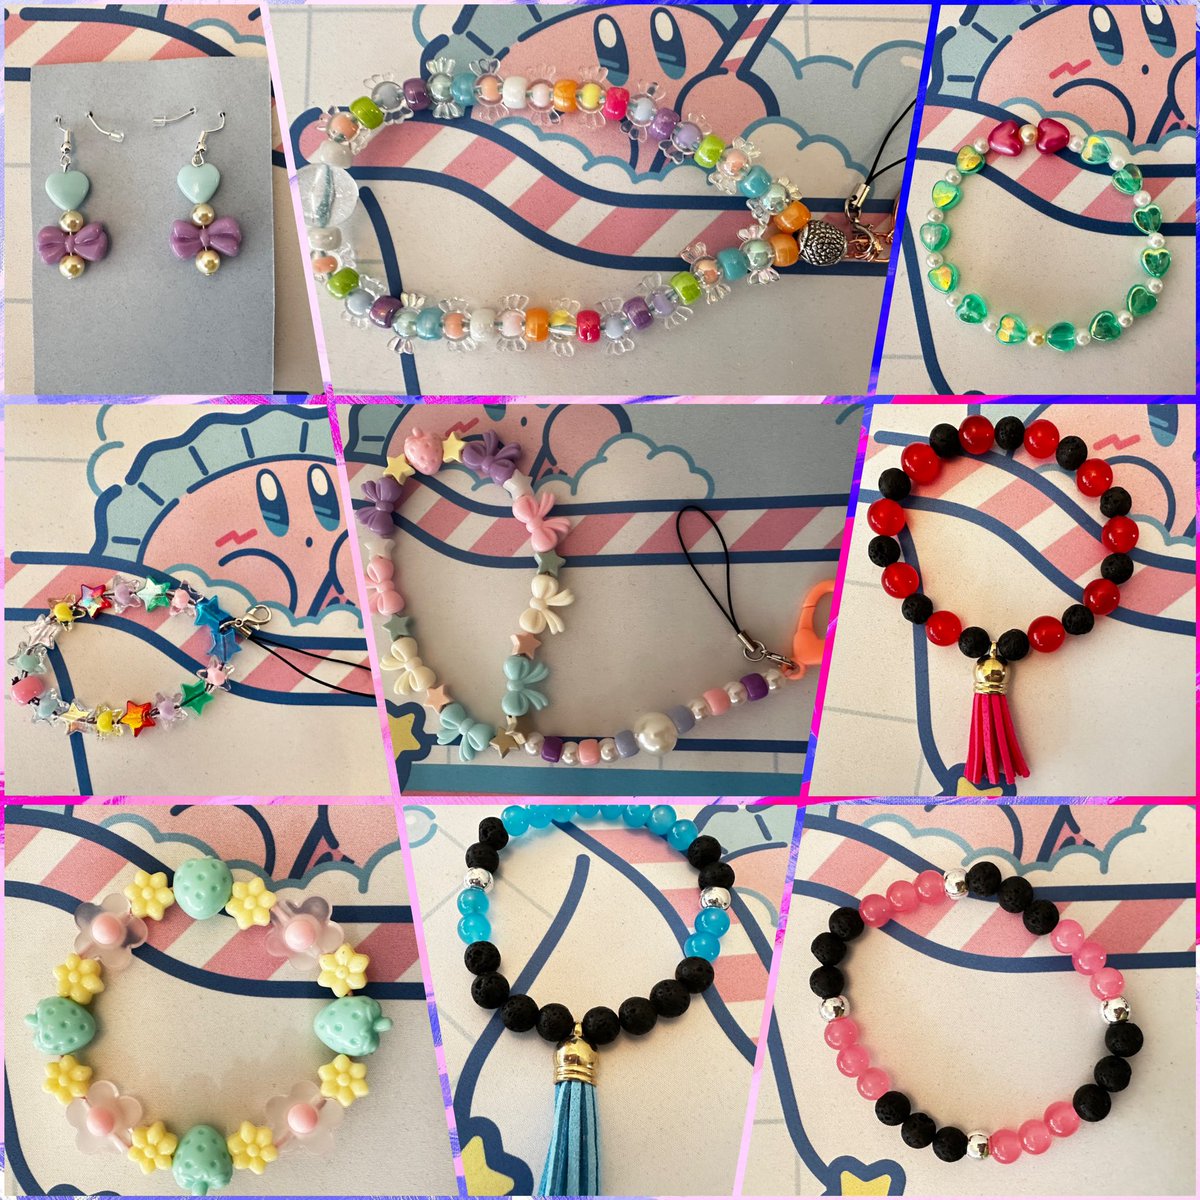 We’ve got all your accessory needs here at alchemists accessory 👀

Swing on by and have a browse🫶 maybe even treat yourself 🎁

All lovingly handmade 🫶

#etsy #shopsmall #handmade #kawaii #cute #stylish #cool #supportlocal #SmallBusiness 

alchemistsaccessory.etsy.com